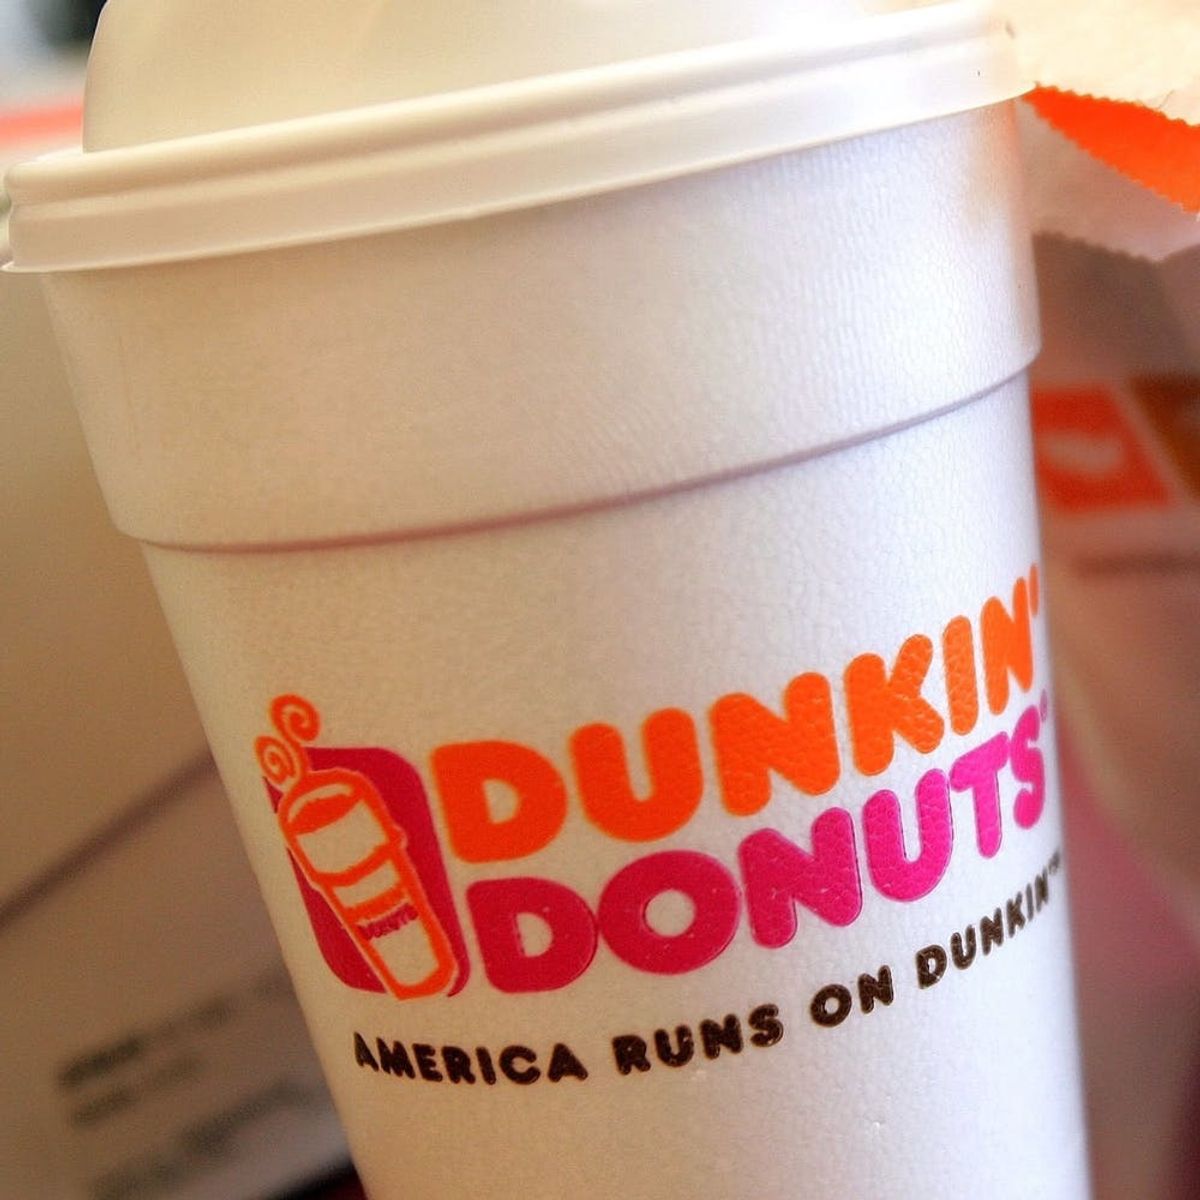 Dunkin’ Donuts Just Released a Coffee-Infused Beer That Will Warm Your Wintery Soul